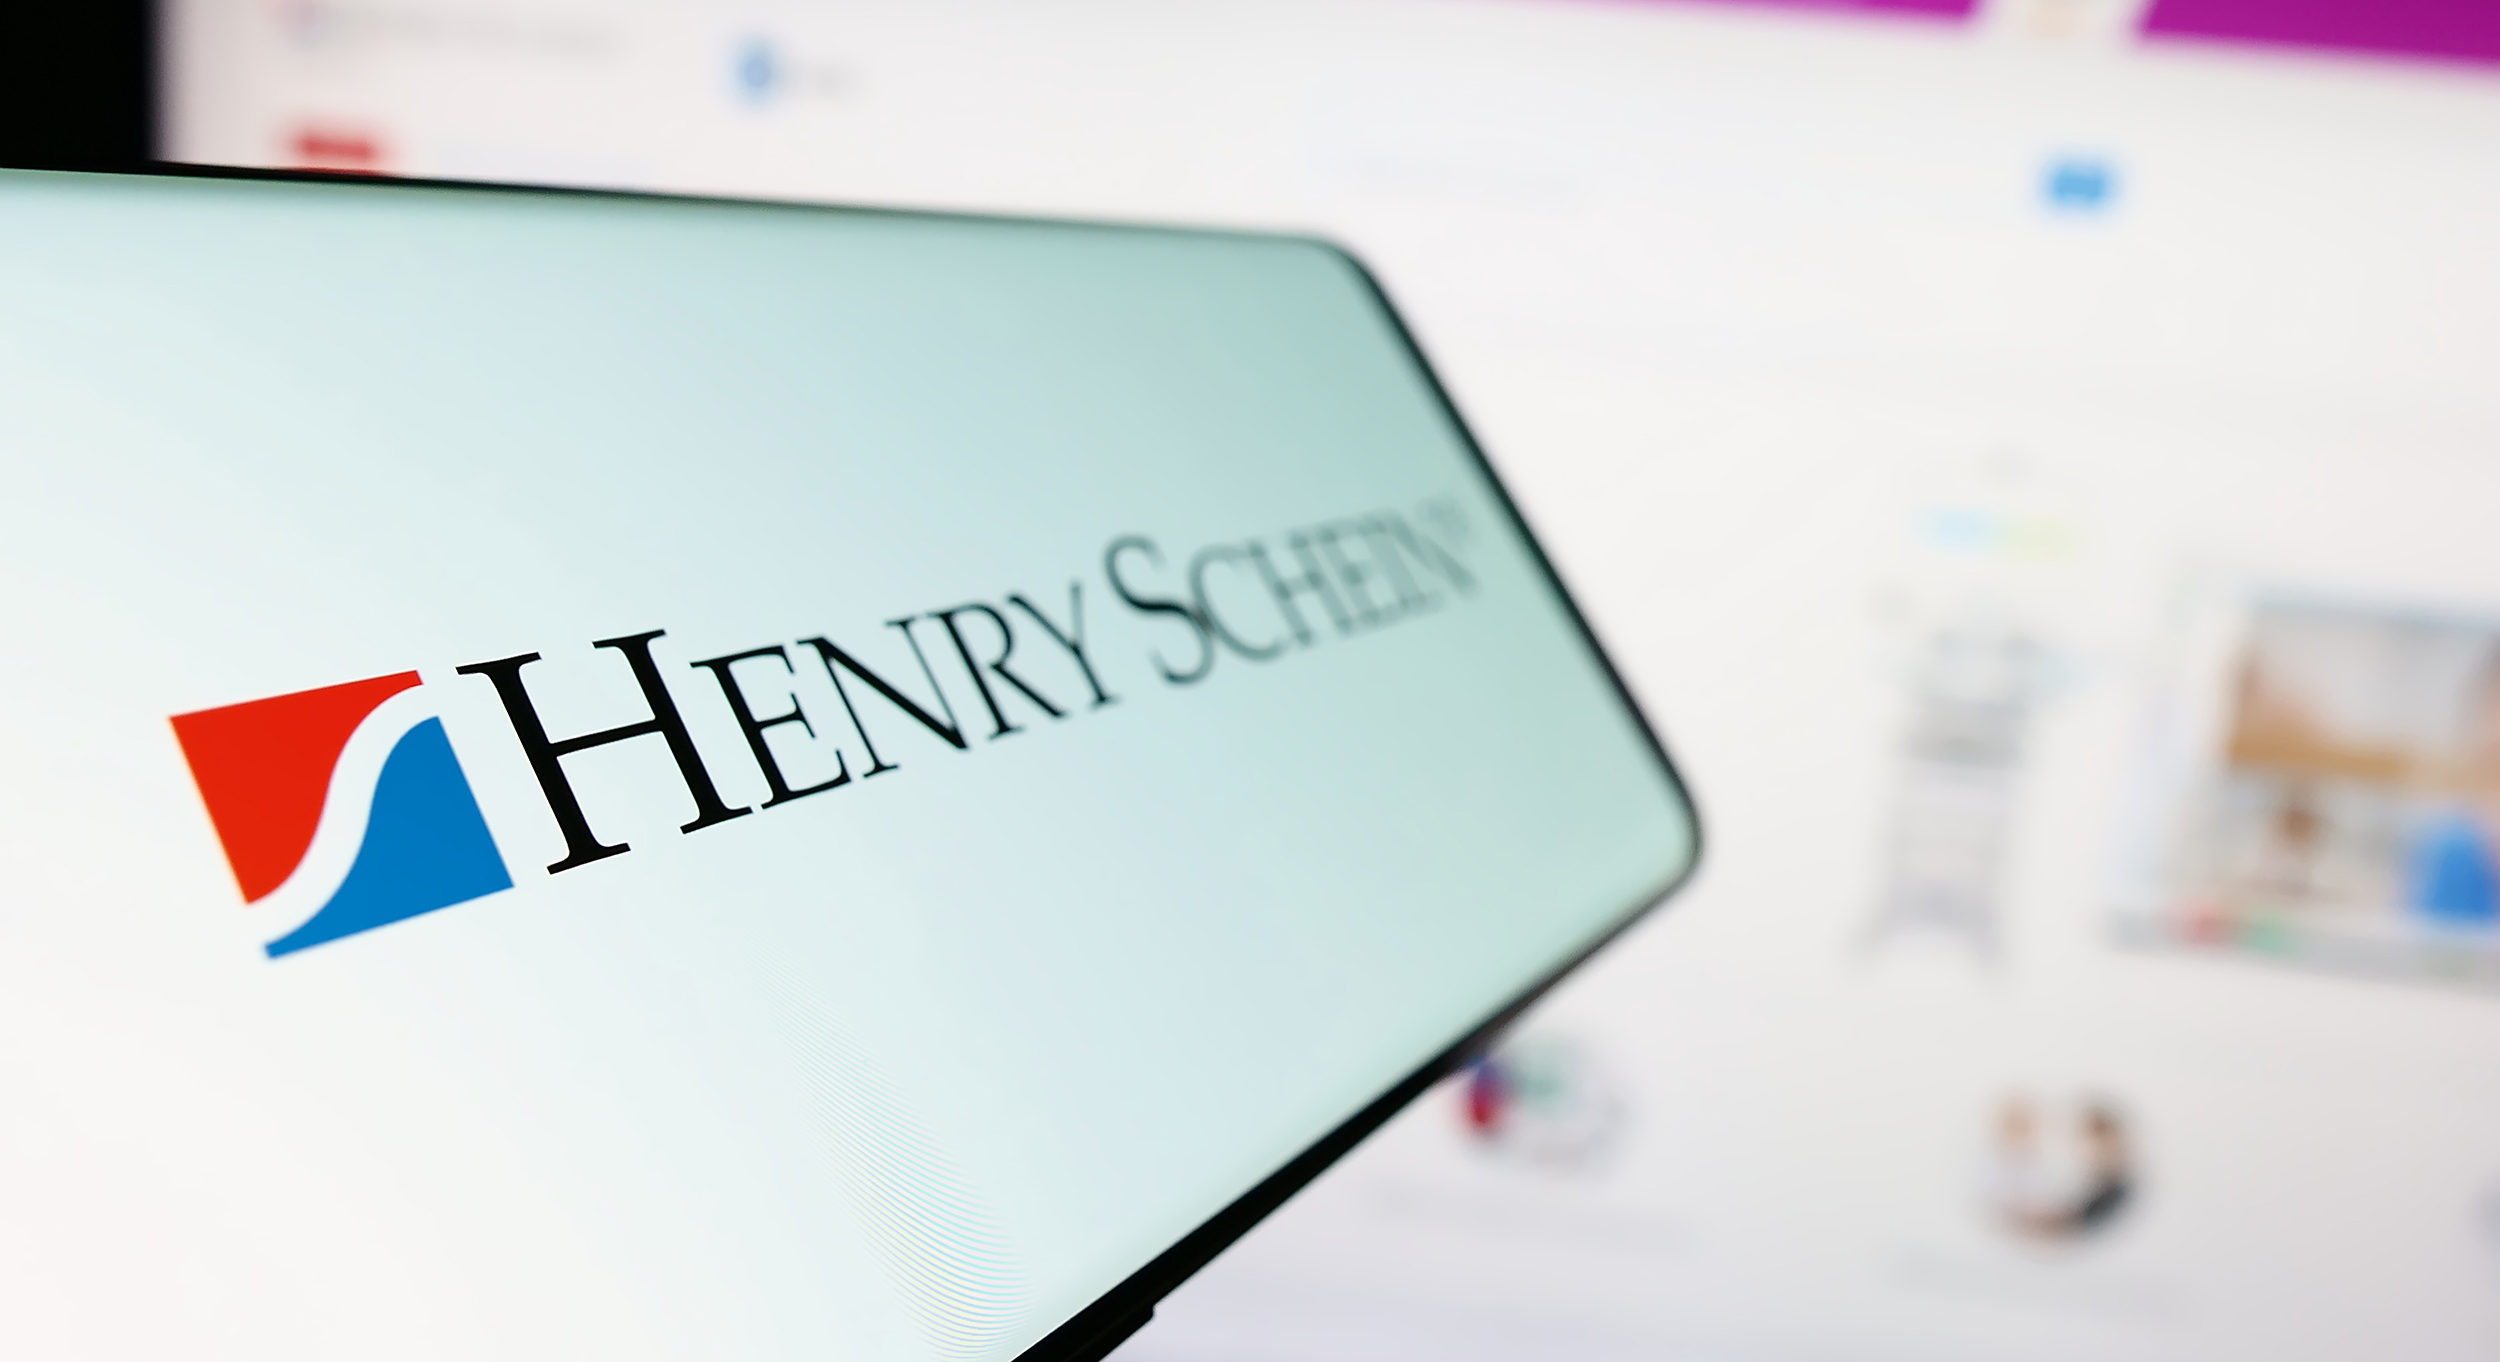 Stuttgart, Germany - 07-02-2023: Cellphone with logo of American healthcare products company Henry Schein Inc. on screen in front of website. Focus on left of phone display.